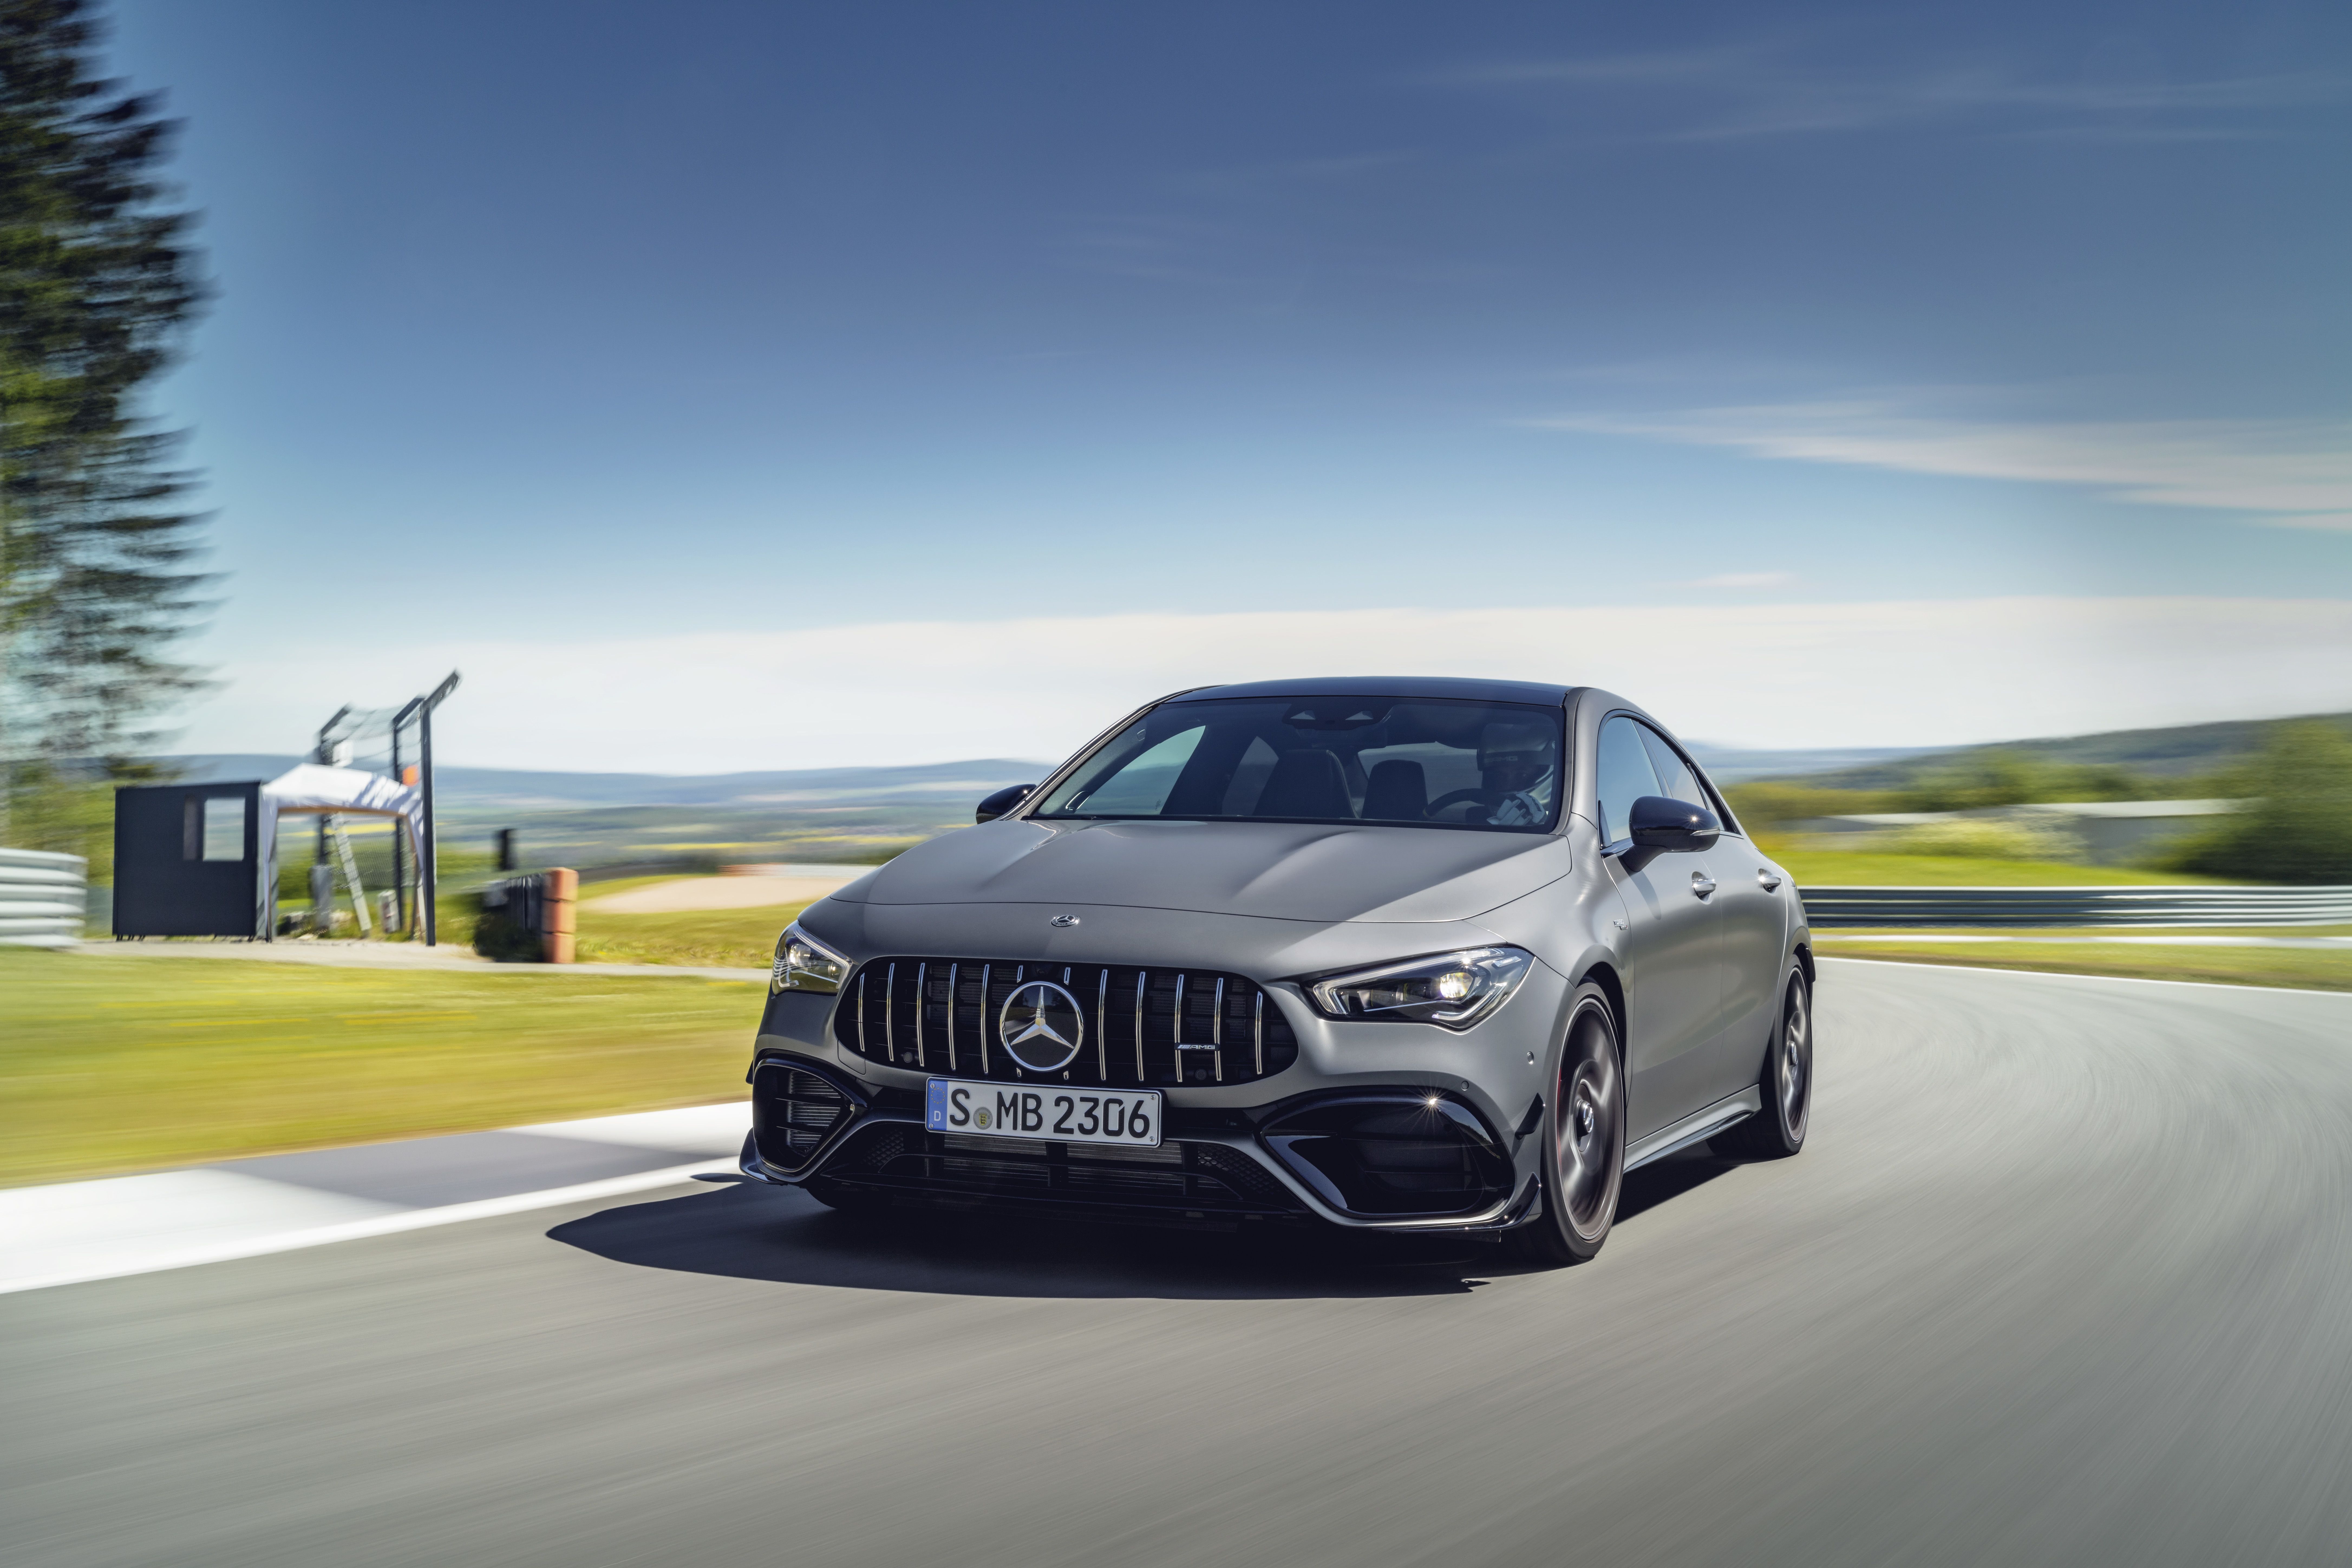 Mercedes muscles up with debut of AMG-powered CLA 45 sedan